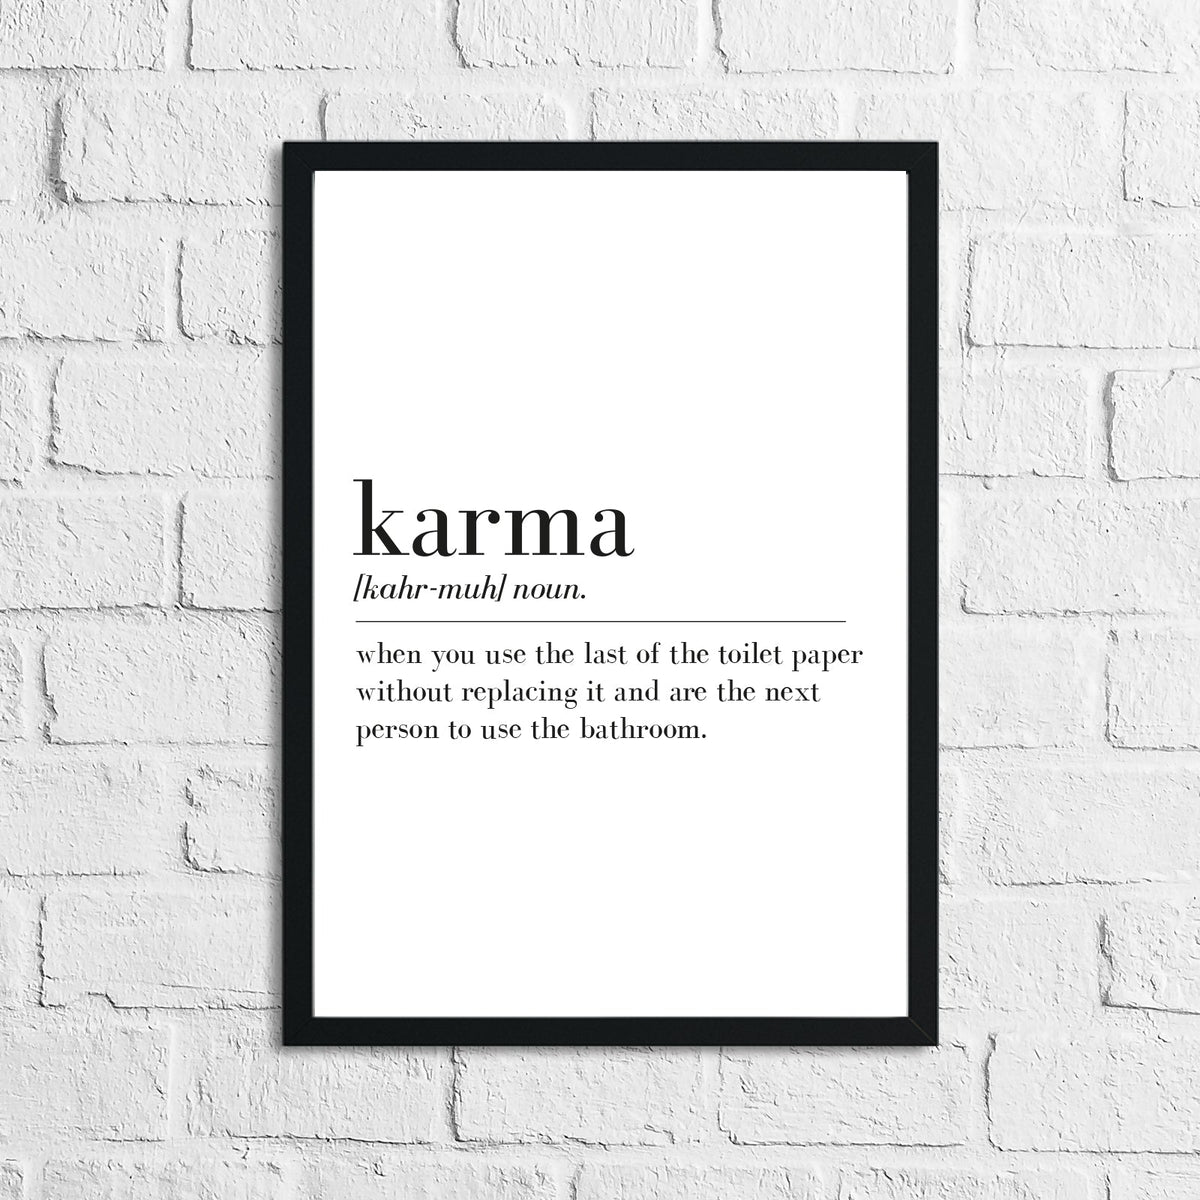 Karma Definition Bathroom Wall Decor Funny Print by WinsterCreations™ Official Store